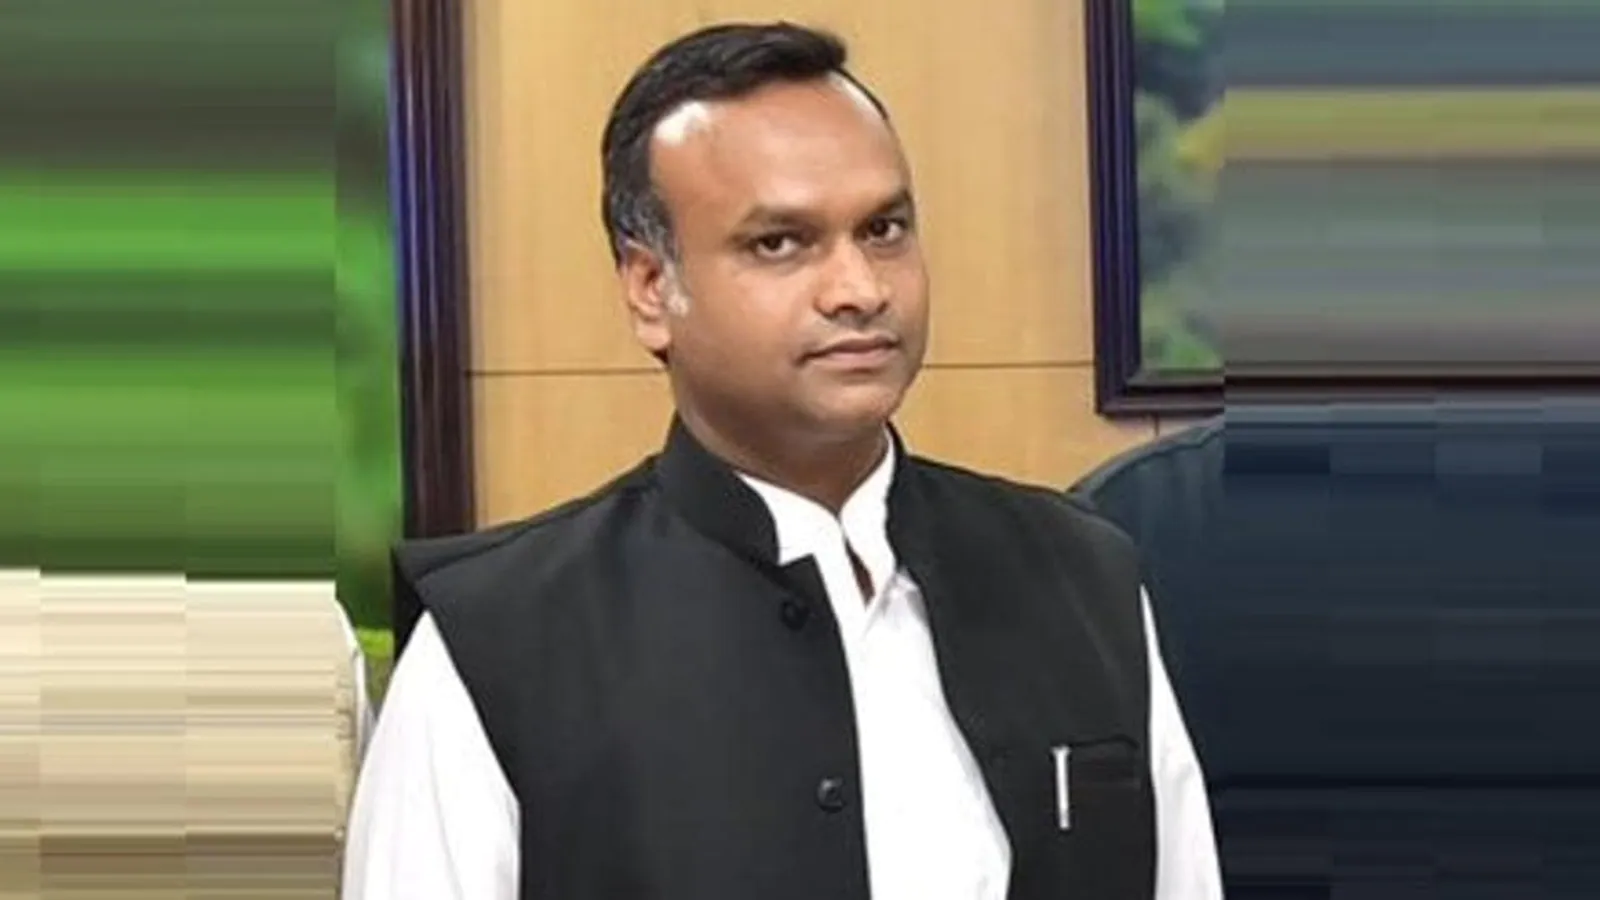 PSI scam: Cong MLA Priyank Kharge summoned by CID